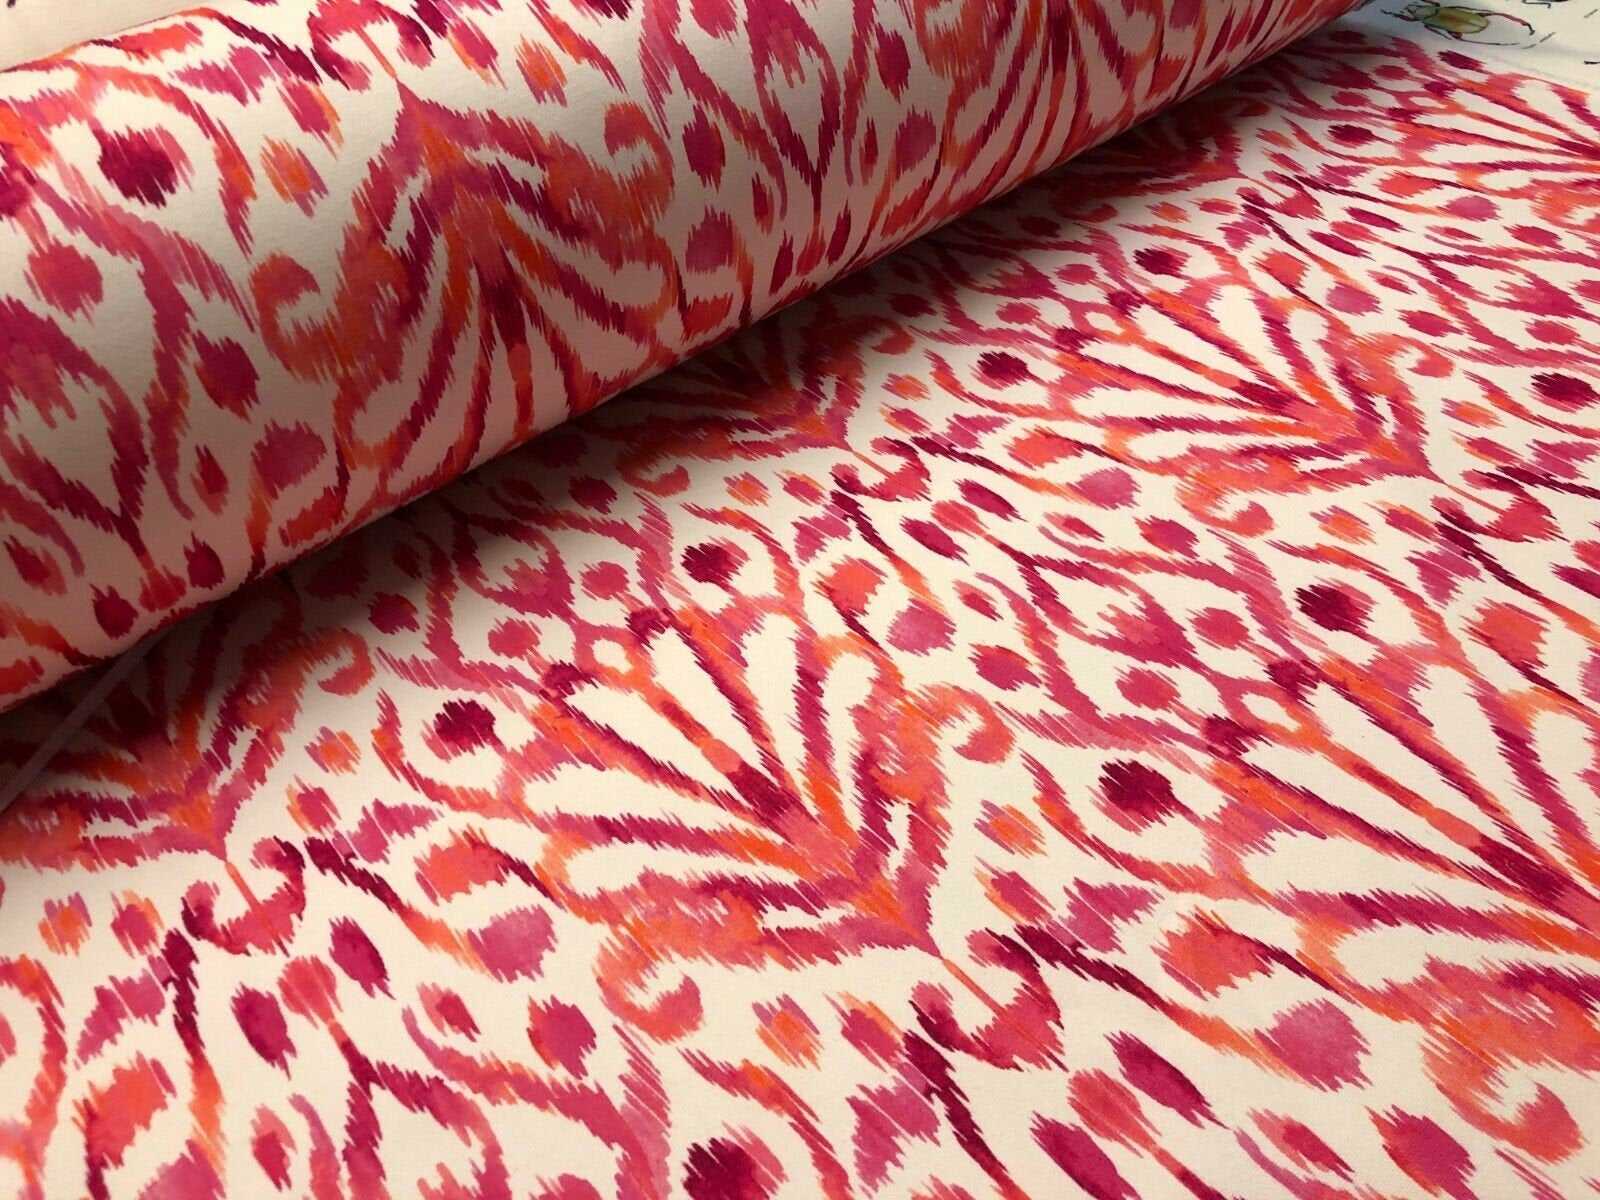 Hot Pink 100% Cotton Canvas Bull Denim Fabric Upholstery Soft Dwr